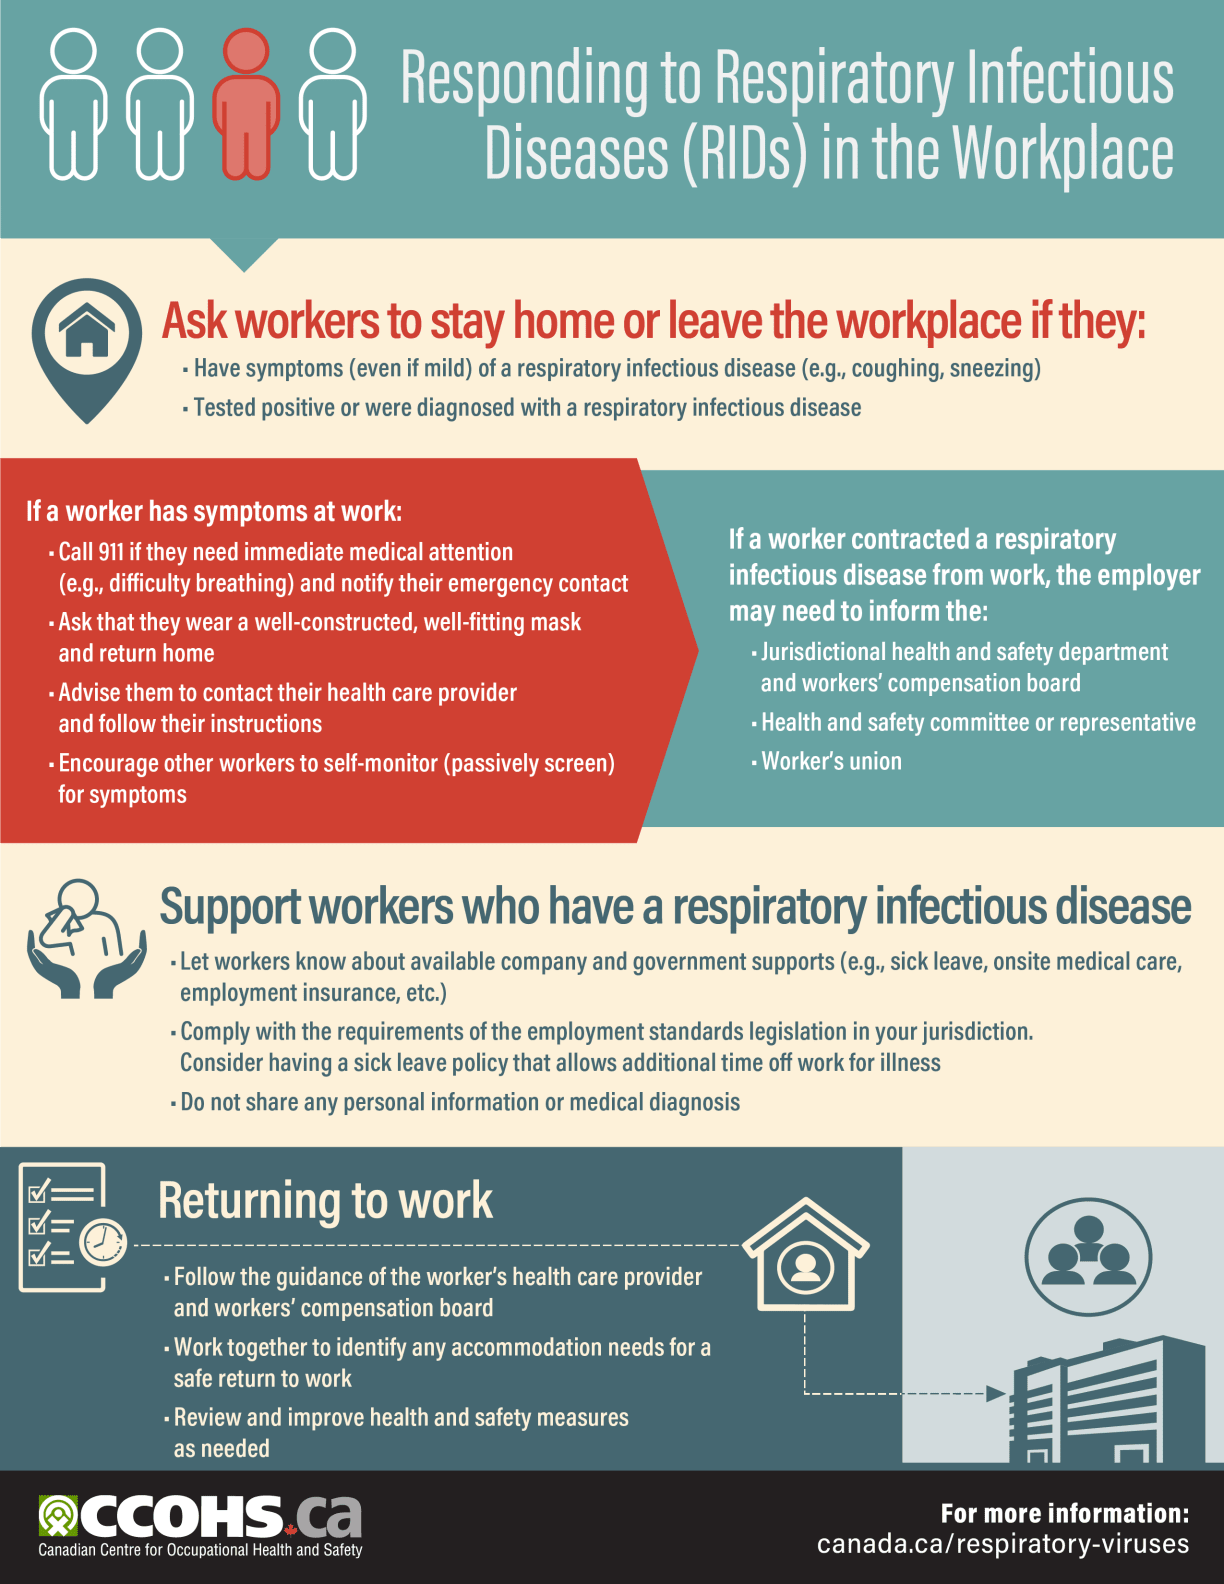 Infographic: Responding to Respiratory Infectious Diseases (RIDs) in the Workplace